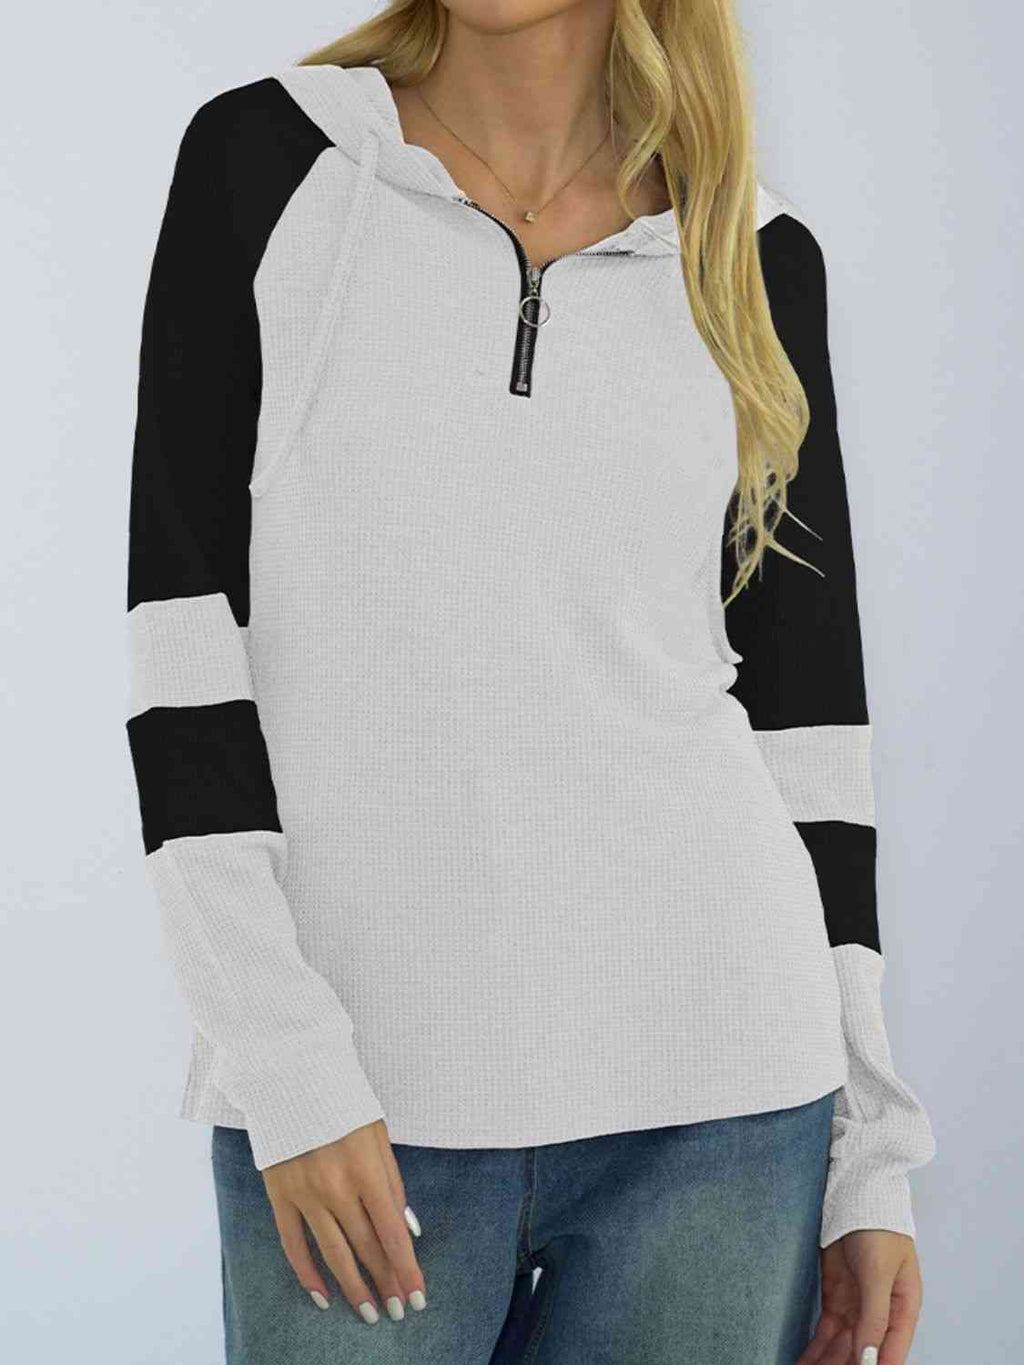 Waffle-Knit Raglan Sleeve Zipper Front Hoodie (3 Colors) Shirts & Tops Krazy Heart Designs Boutique White S 